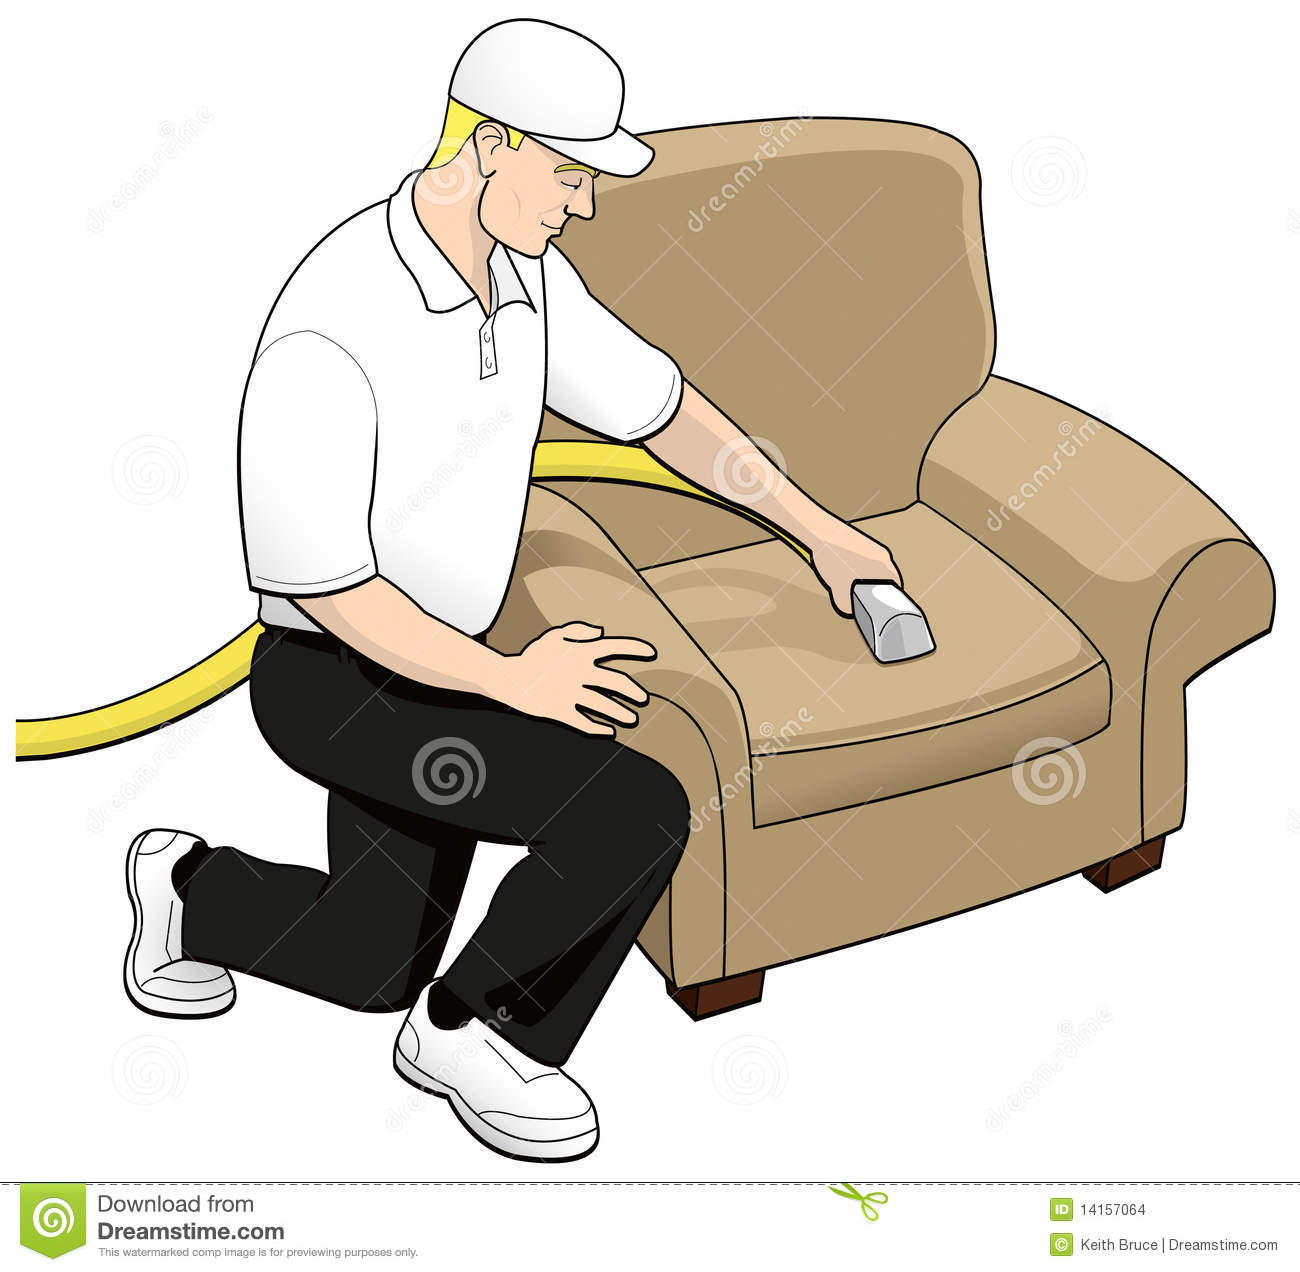 Very Clean And Professional Artwork Of An Upholstery Cleaning